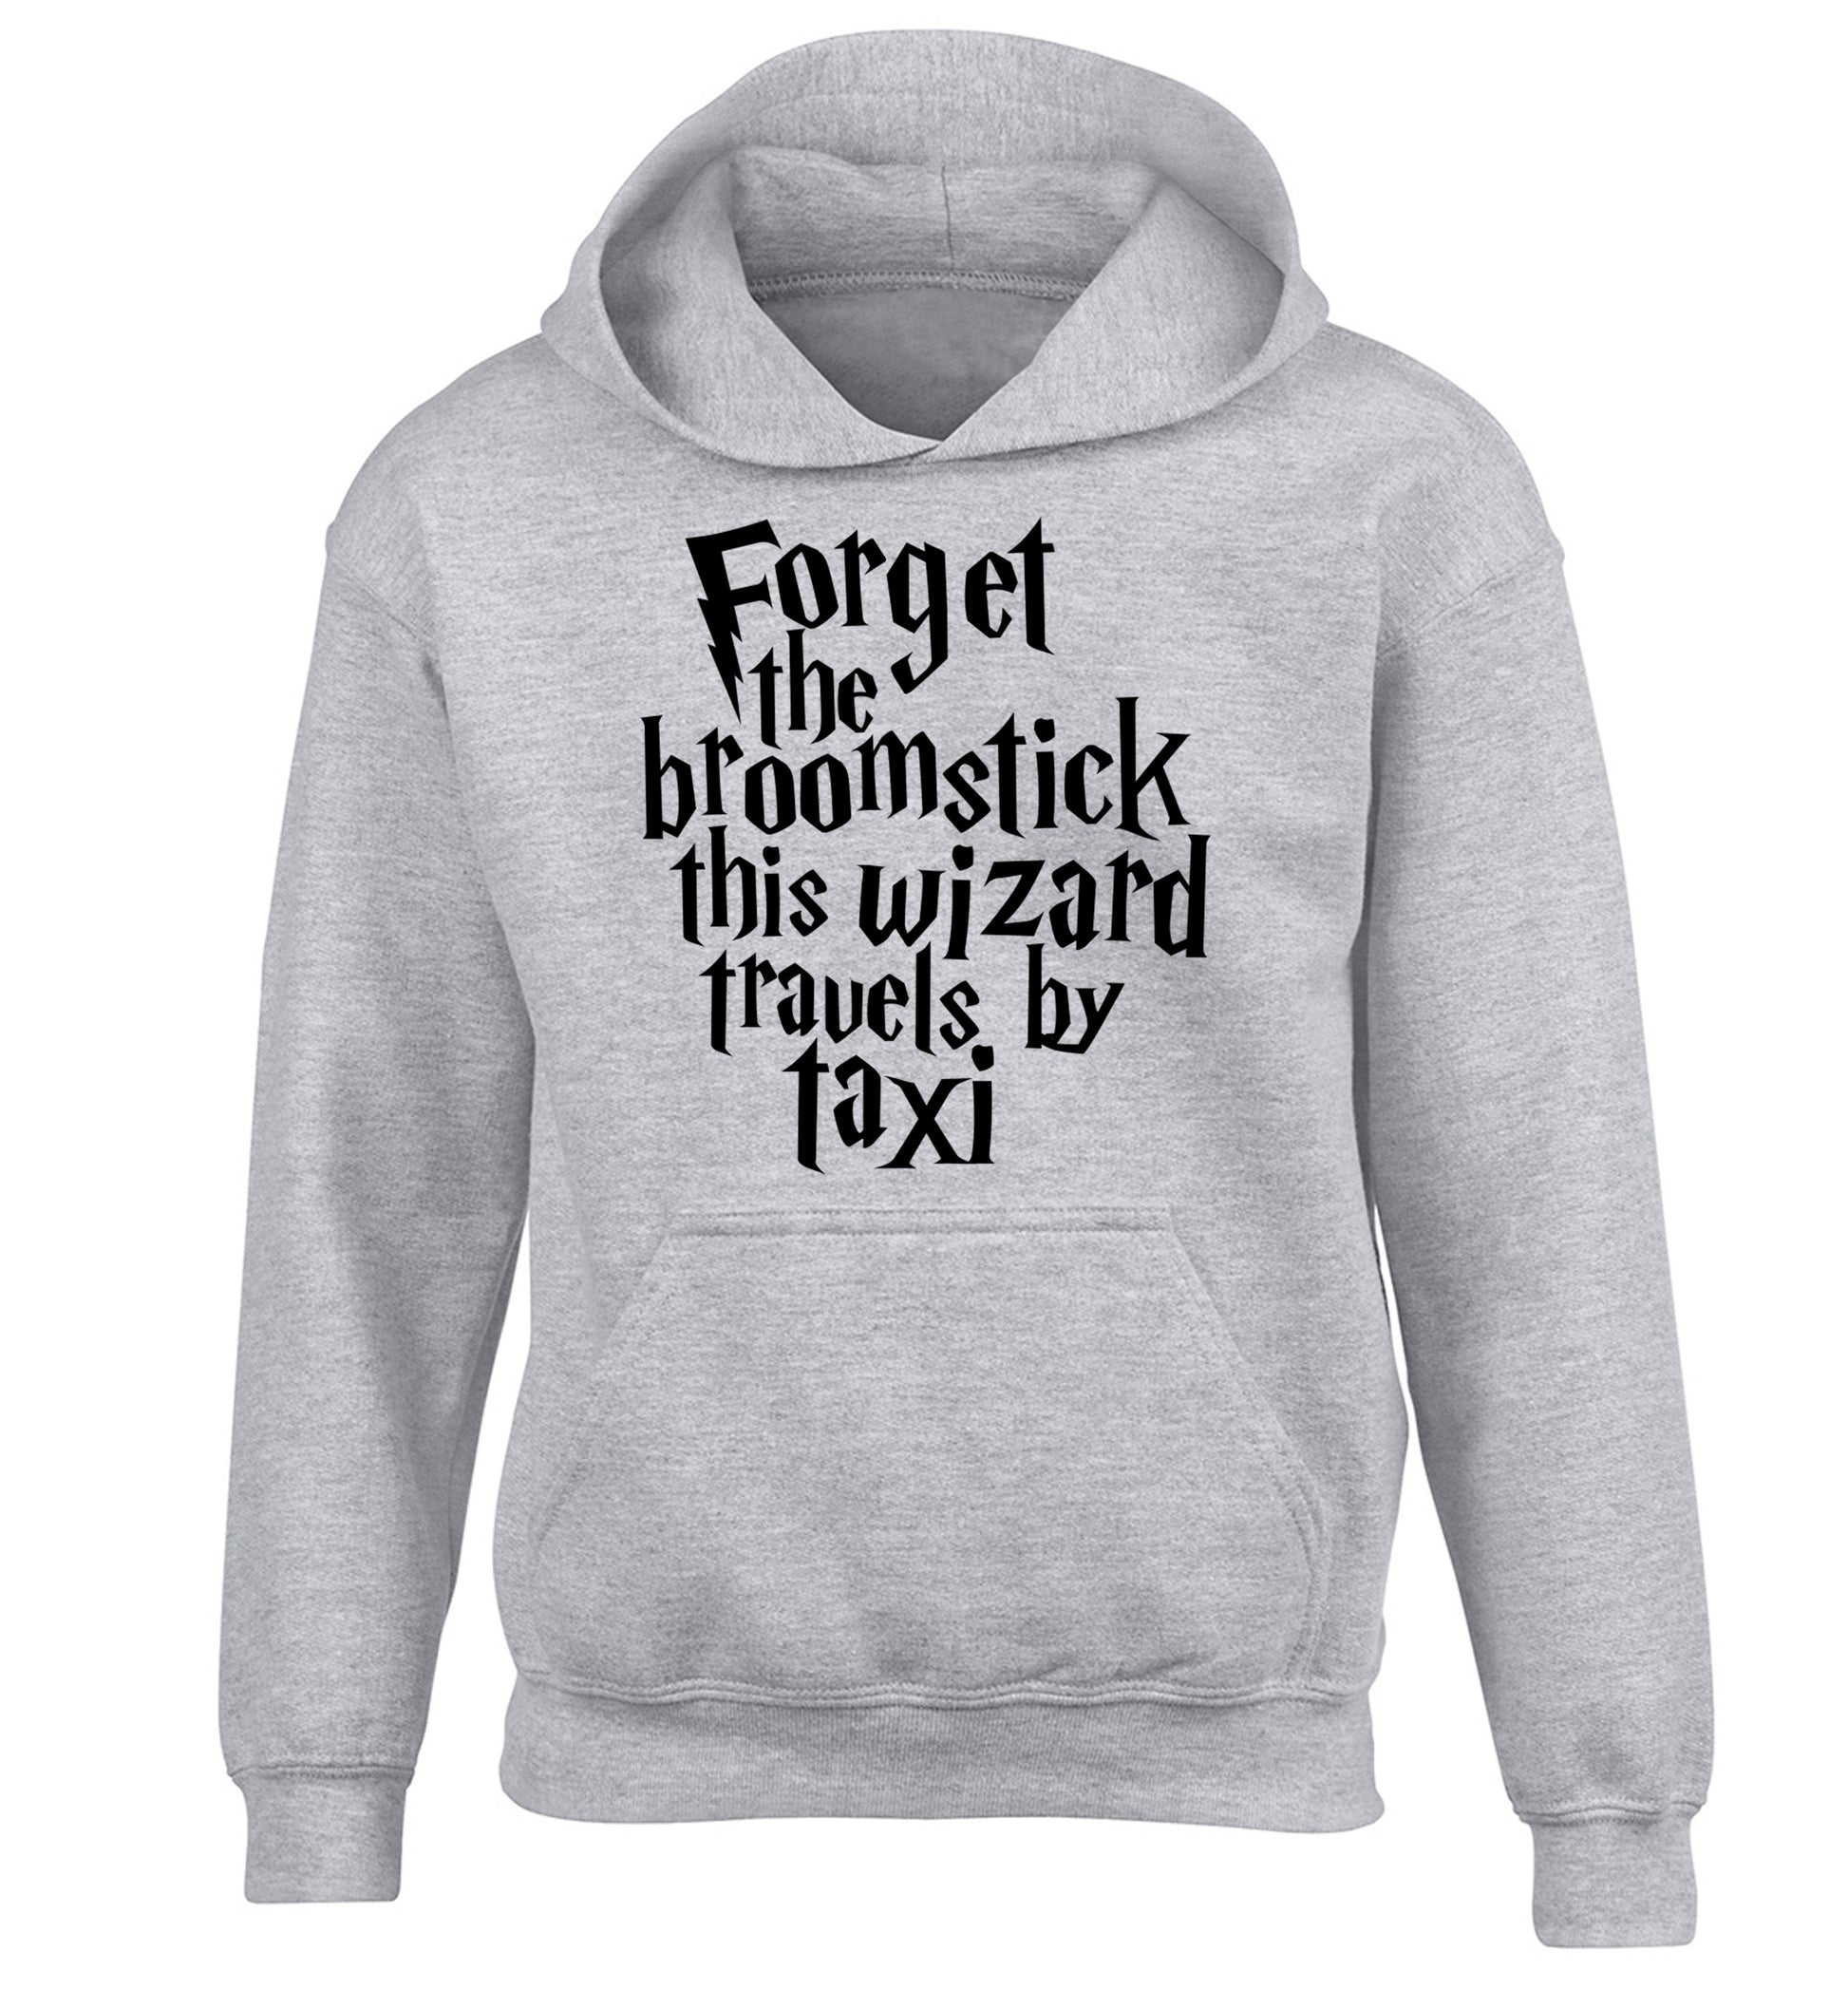 Forget the broomstick this wizard travels by taxi children's grey hoodie 12-14 Years